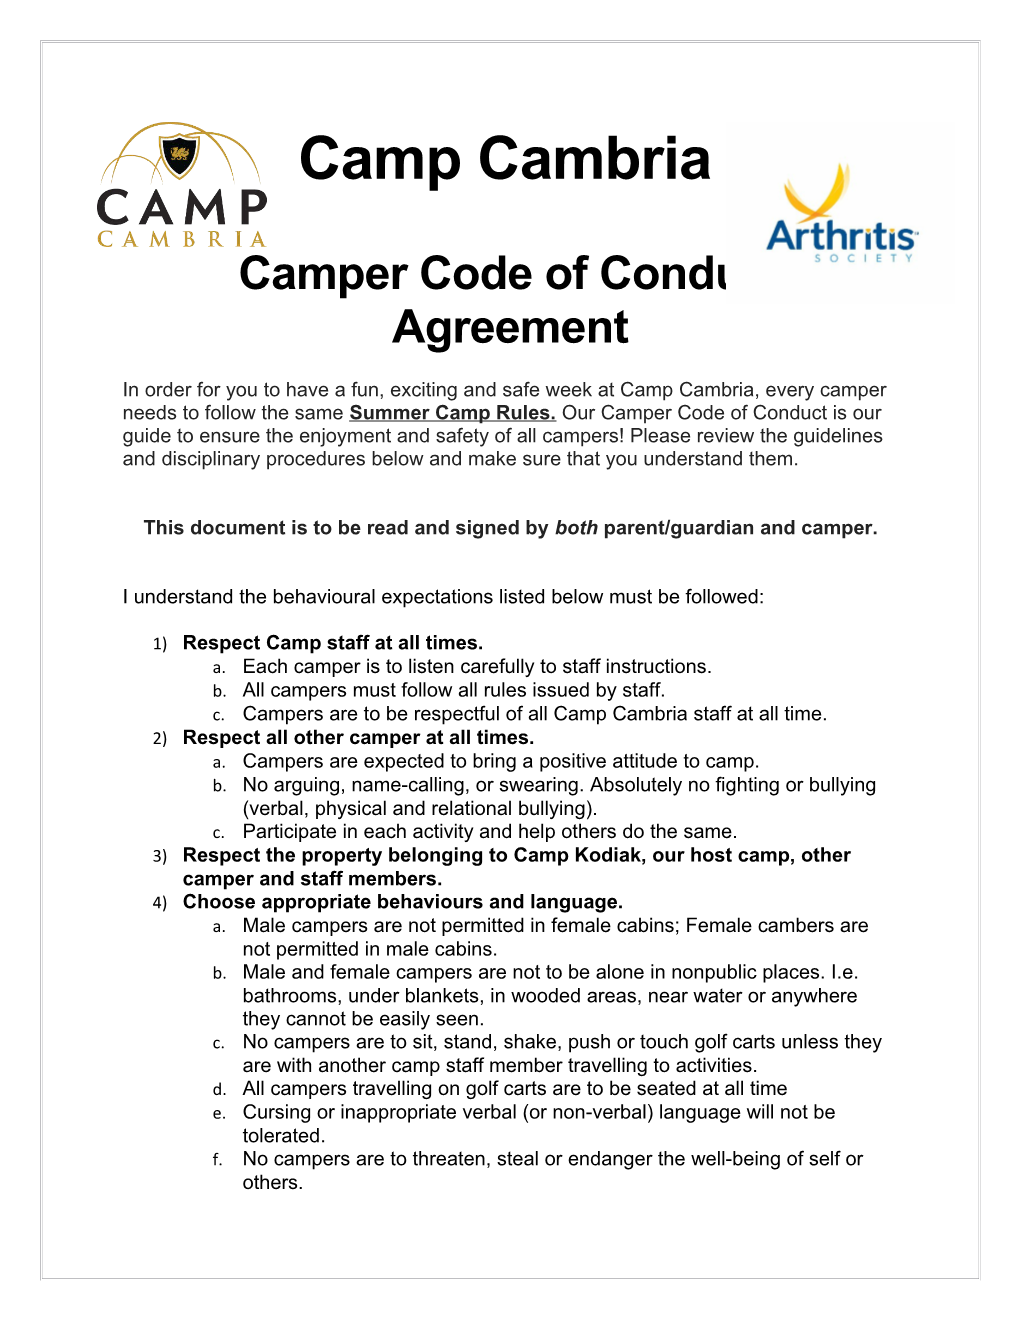 Camper Code of Conduct Agreement